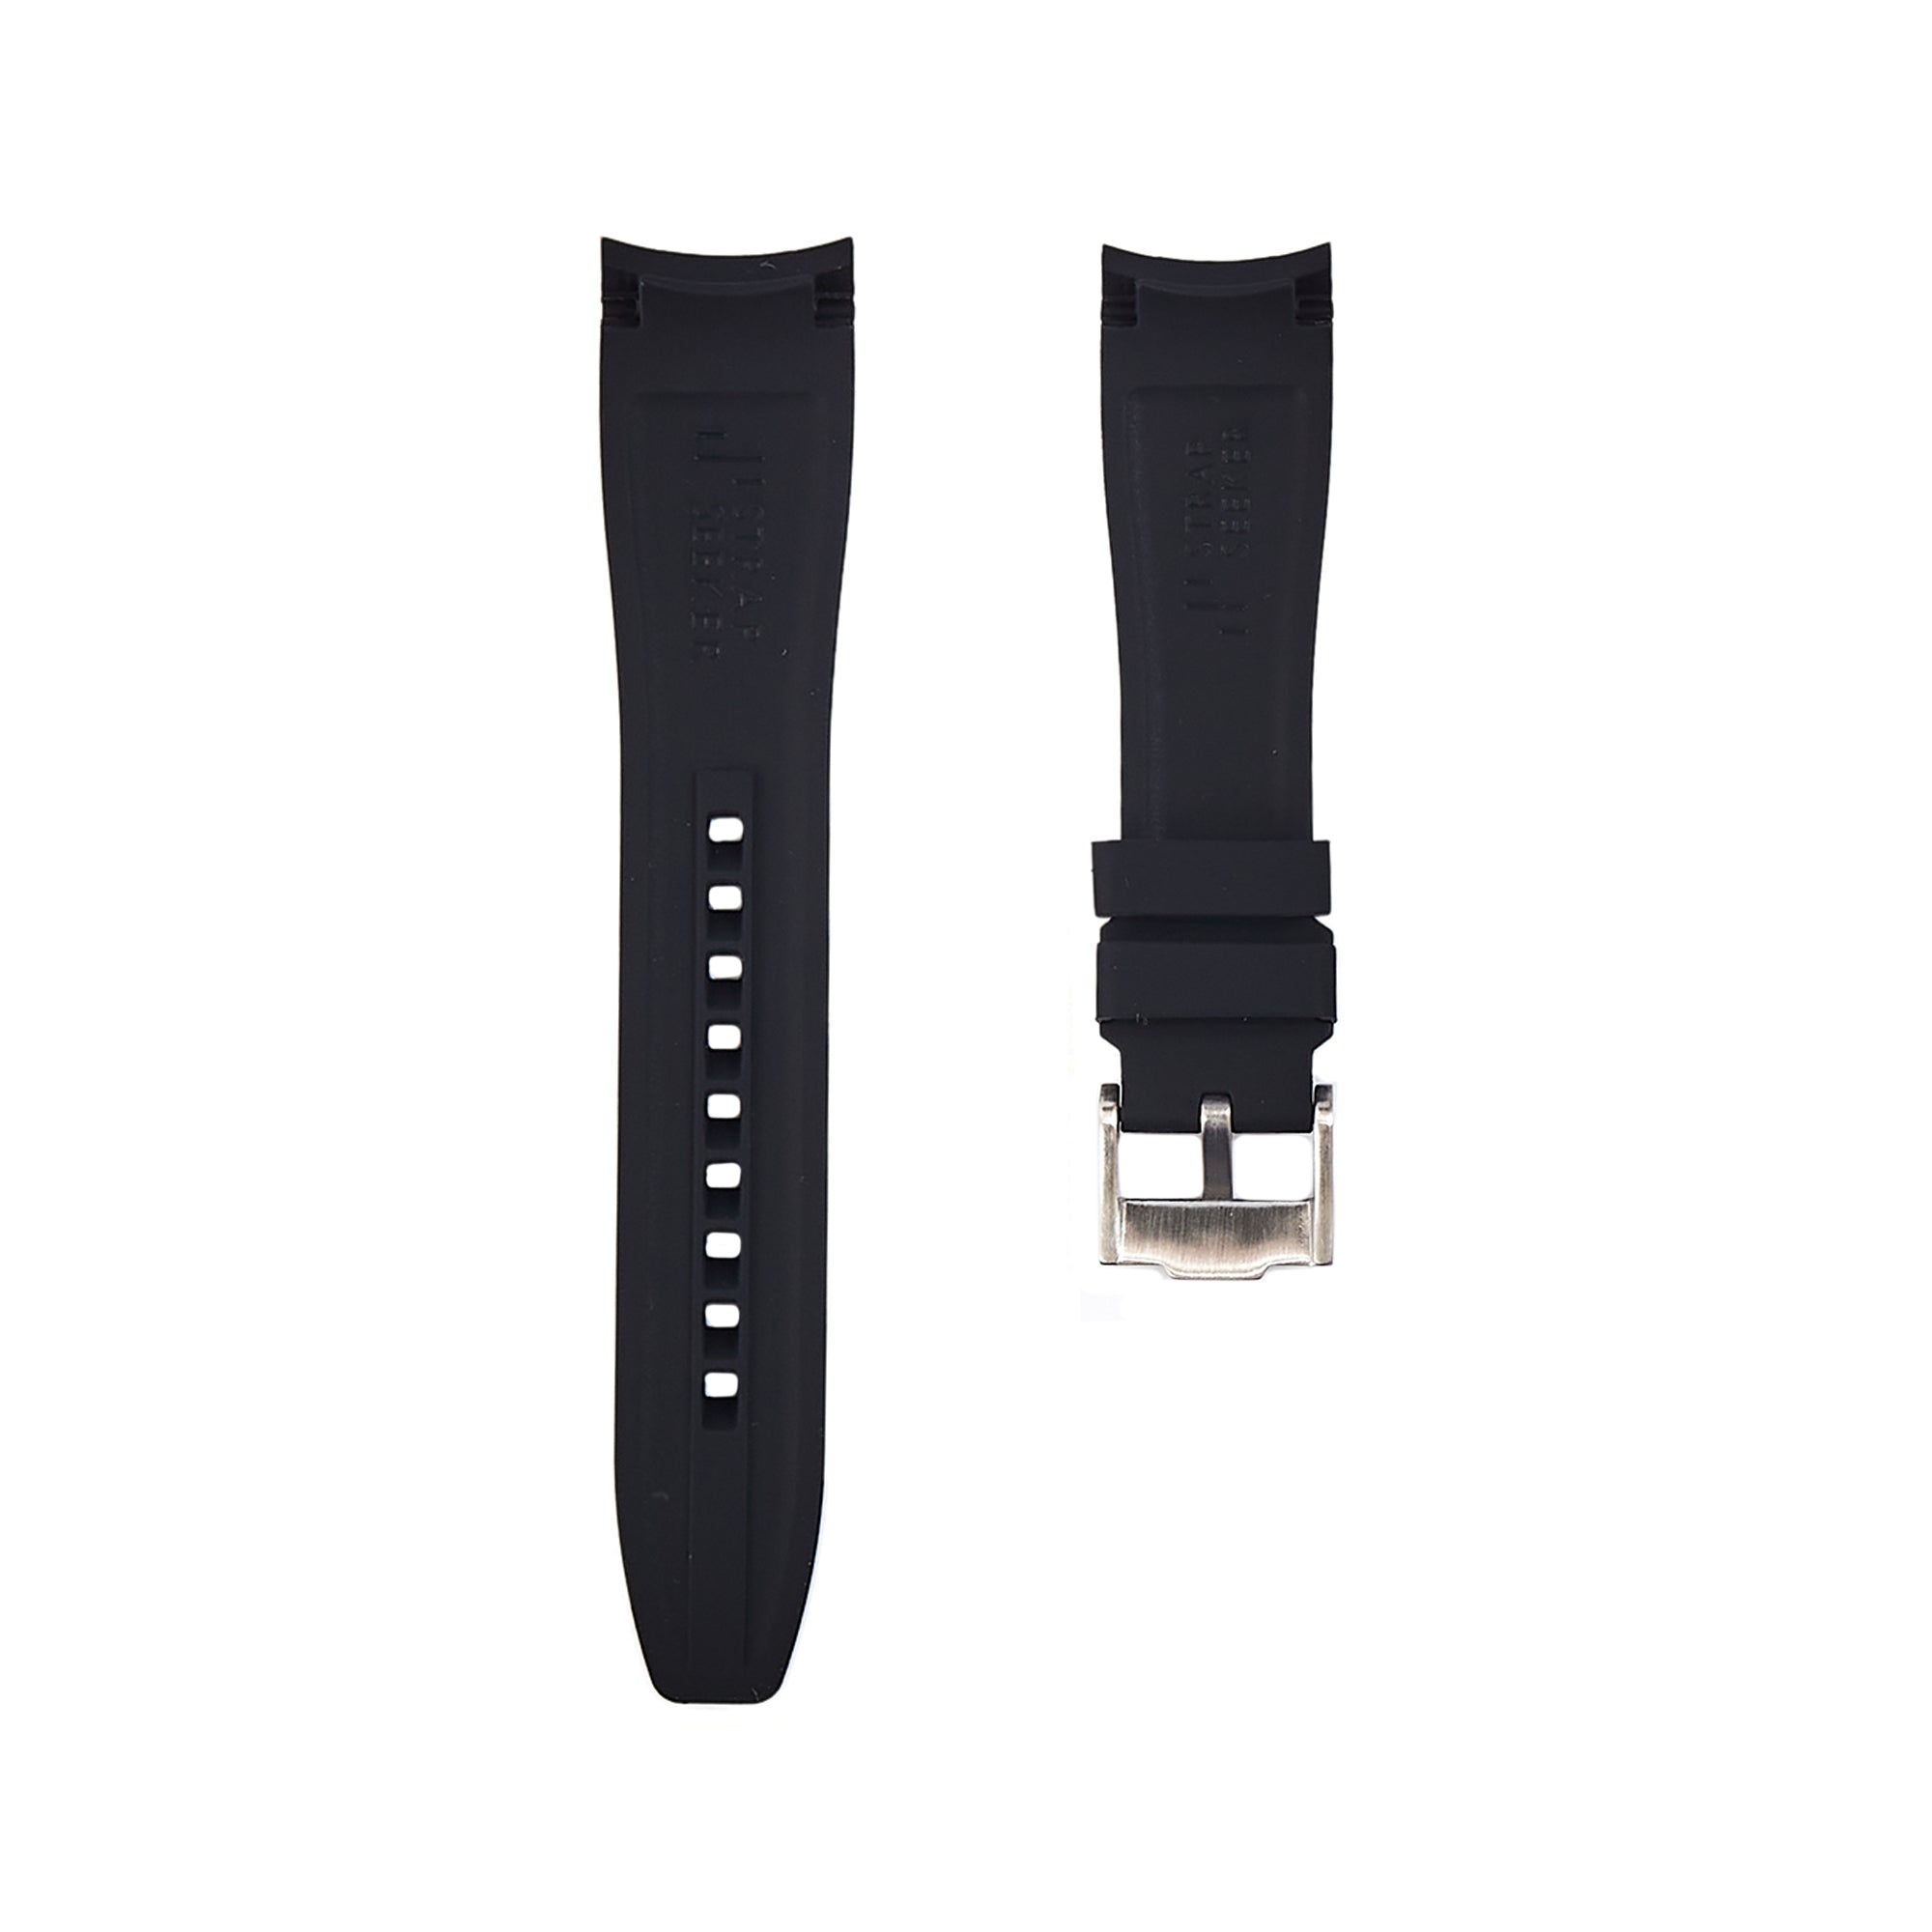 Curved End Soft Silicone Strap - Compatible with Orient Kamasu – Black (2418) -StrapSeeker